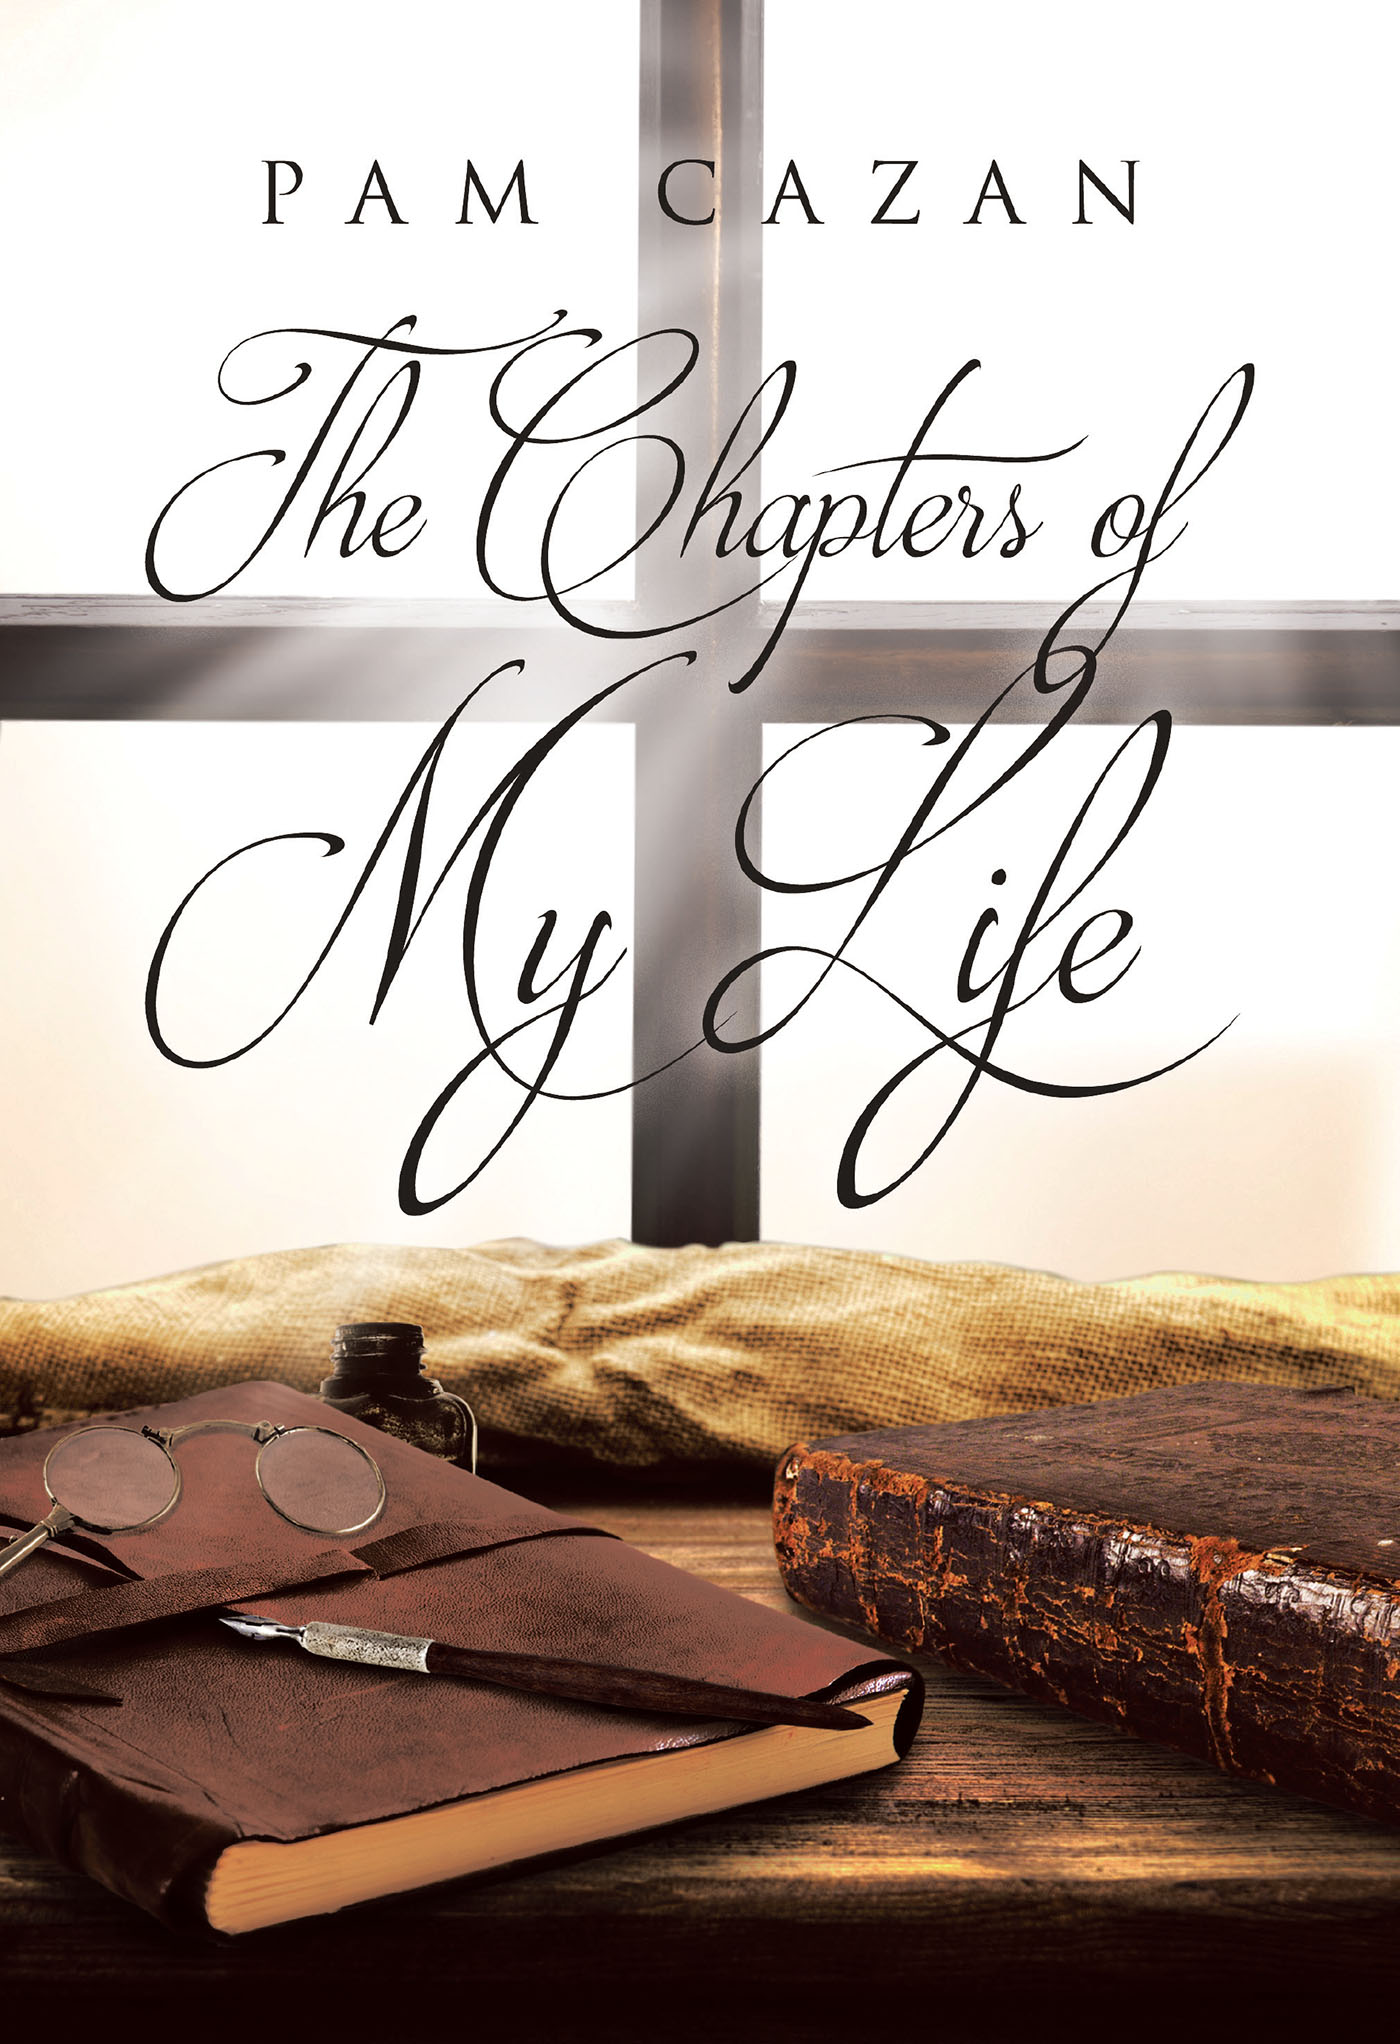 Author Pam Cazan’s New Book, "The Chapters of My Life," is About a Woman Who Has Gone Through Many Trials and Tribulations in Her Turbulent Life